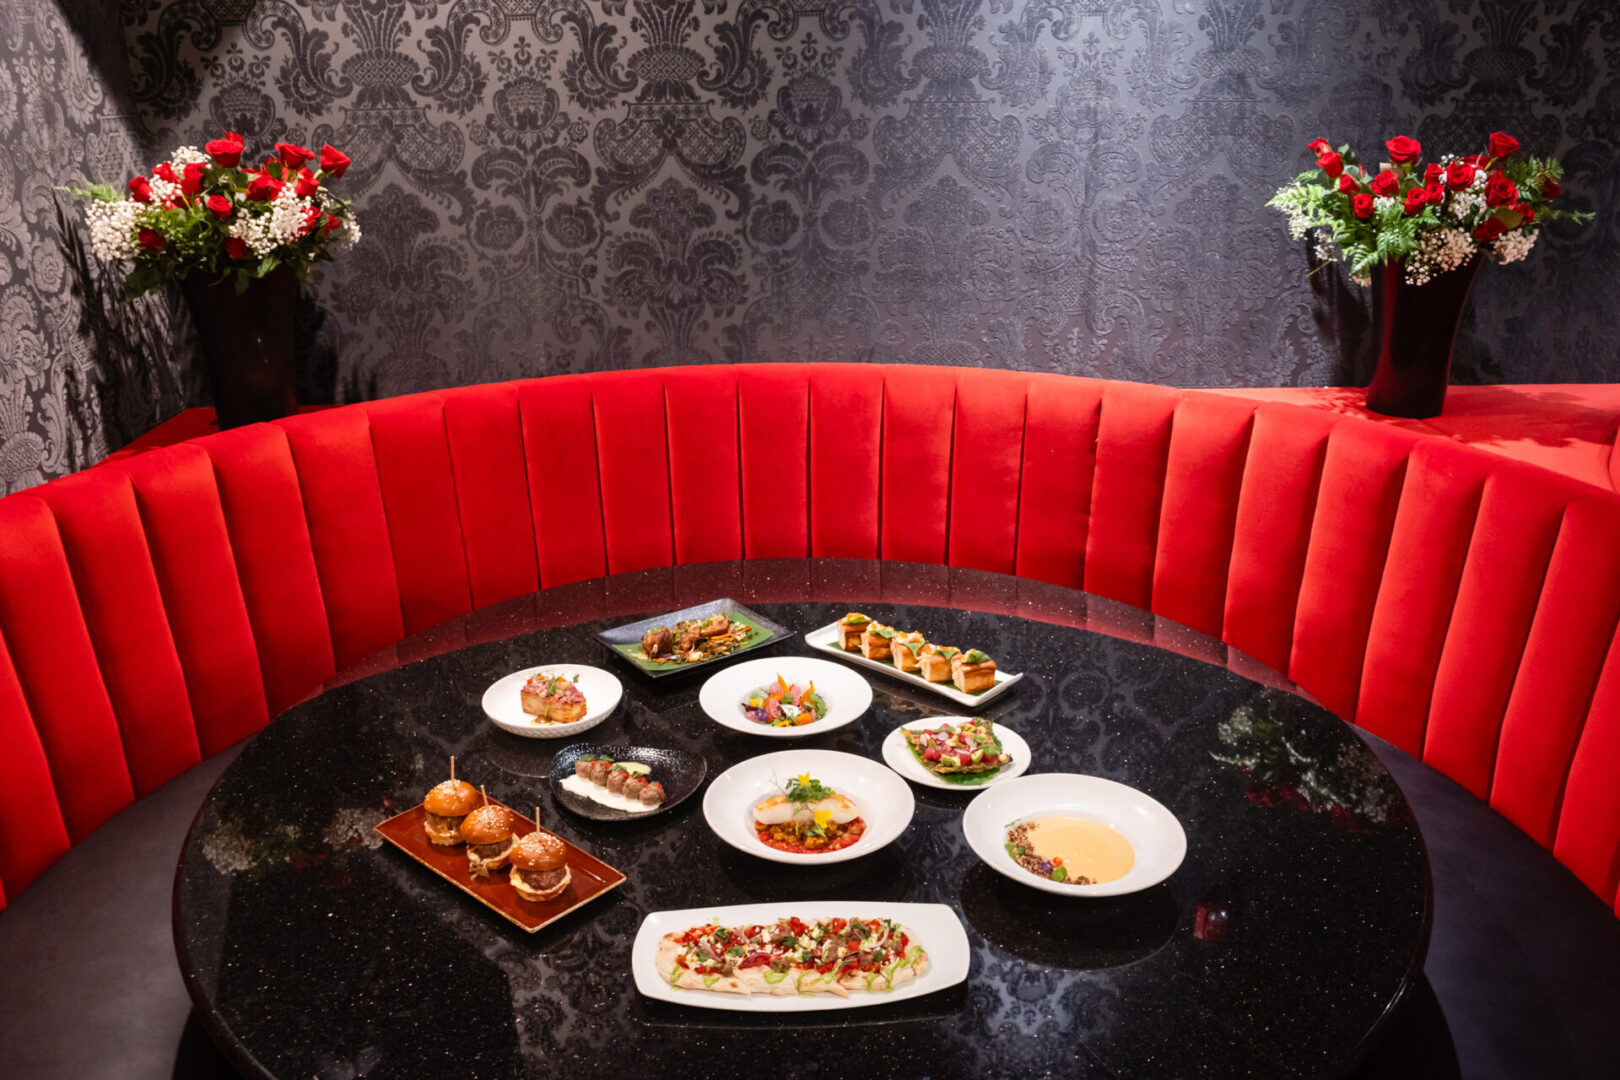 A round table in the luxury lounge with several plates of food on it.